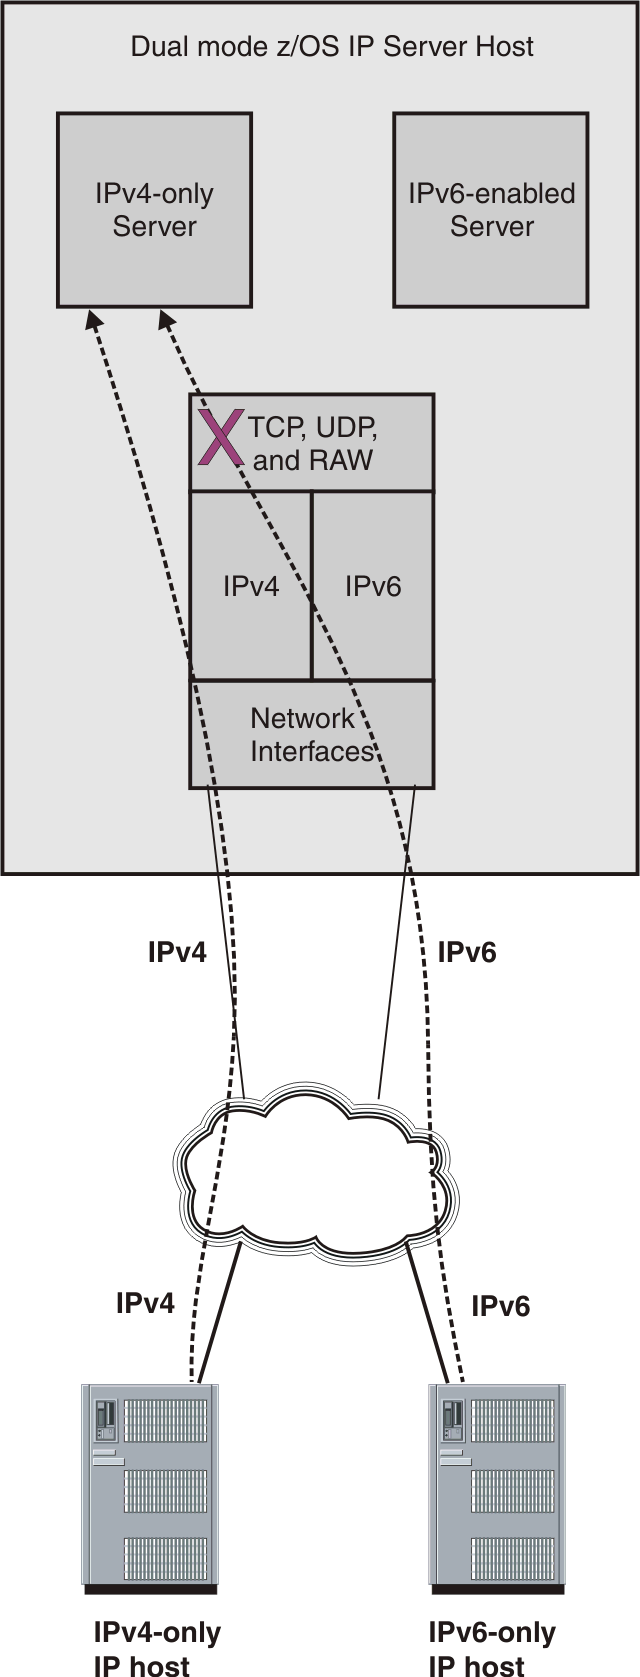 IPv4-only IP host communicates with an IPv4-only server; IPv6-only IP host cannot communicate with an IPv4-only server